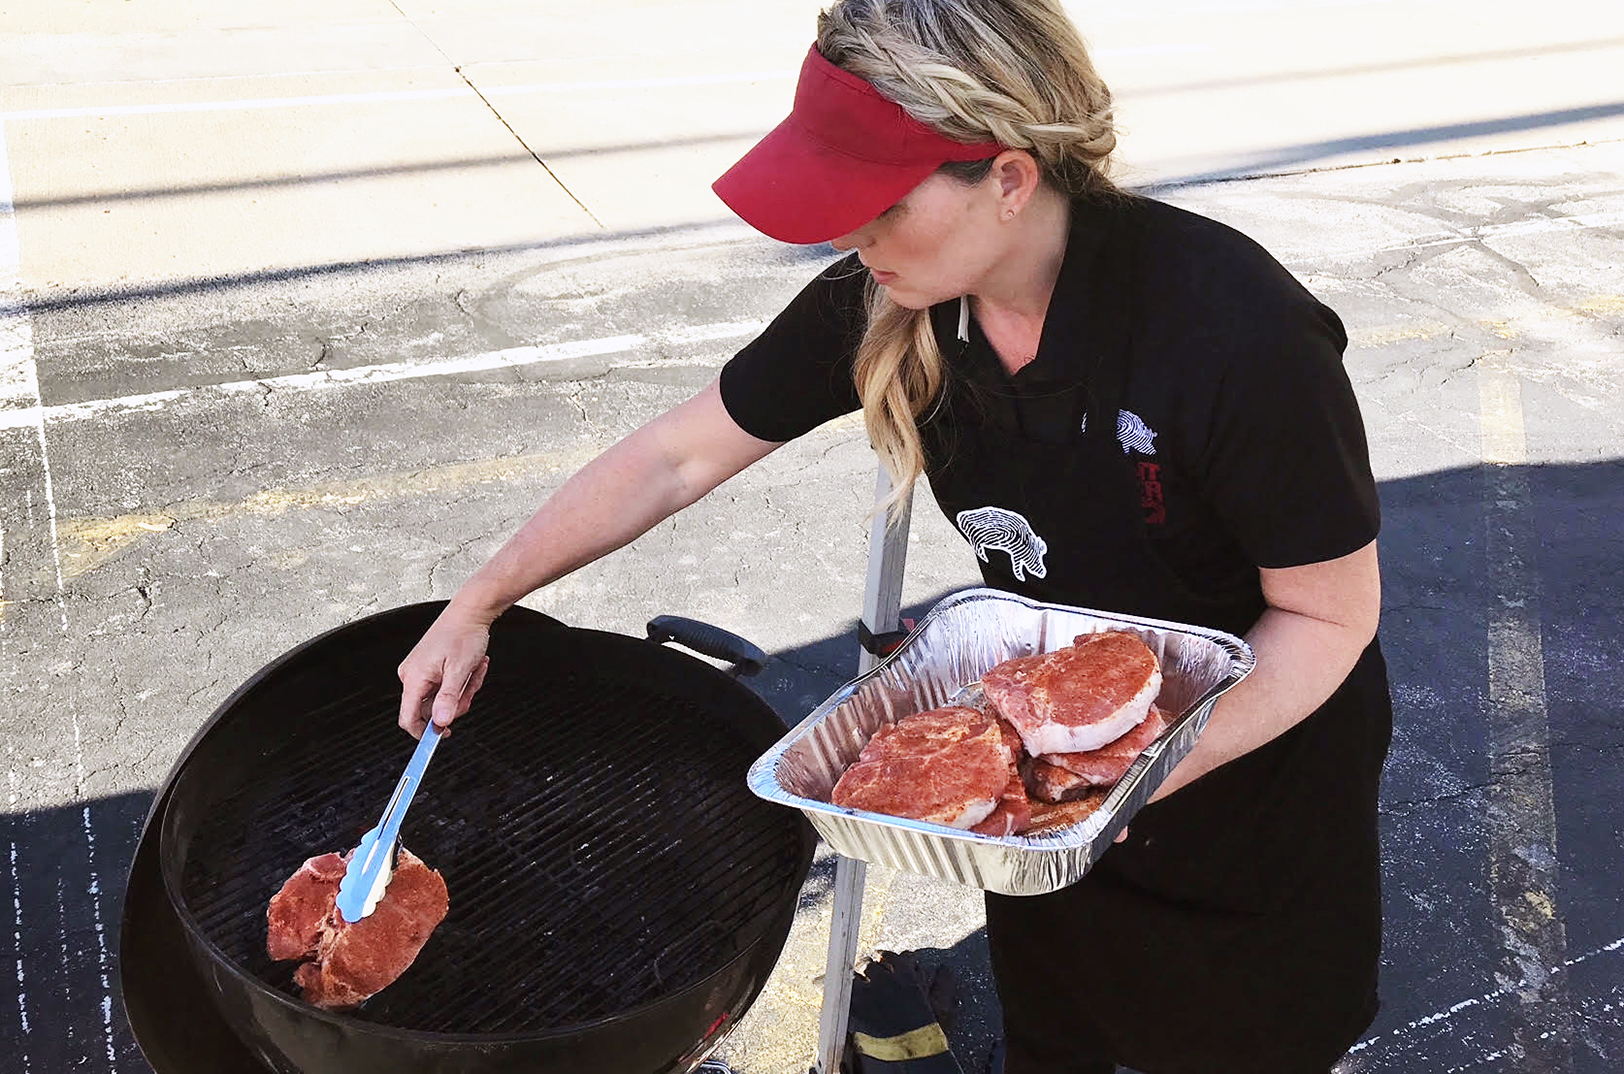 KC pitmaster joins celebrity chefs in 'BBQ Brawl'; how reality TV ...